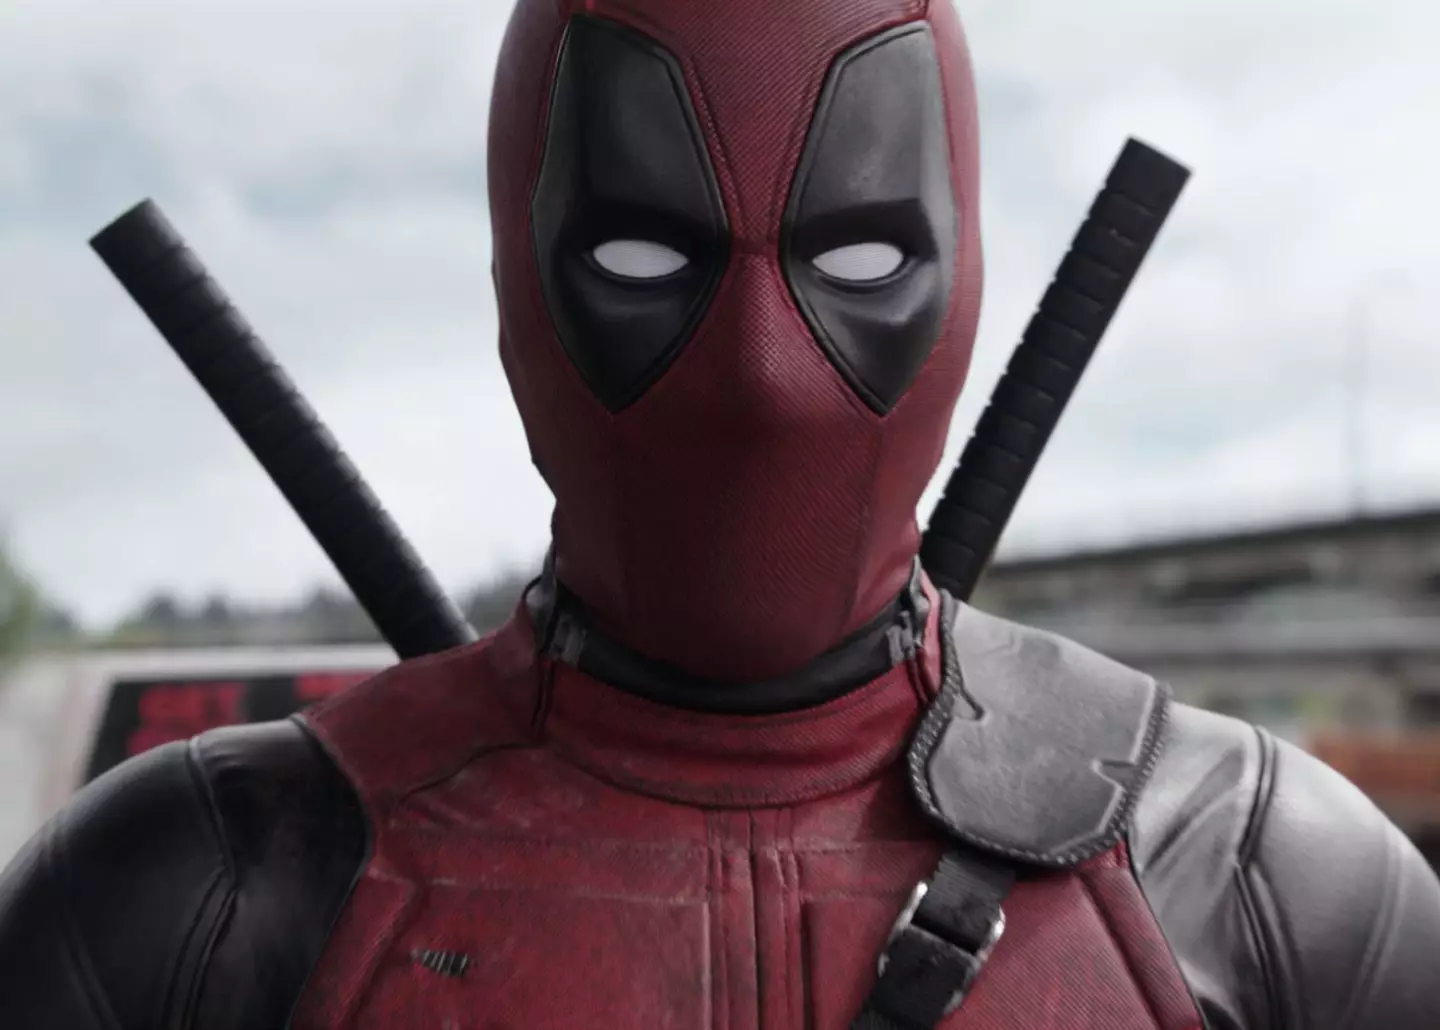 Deadpool is among the productions impacted by the strike.